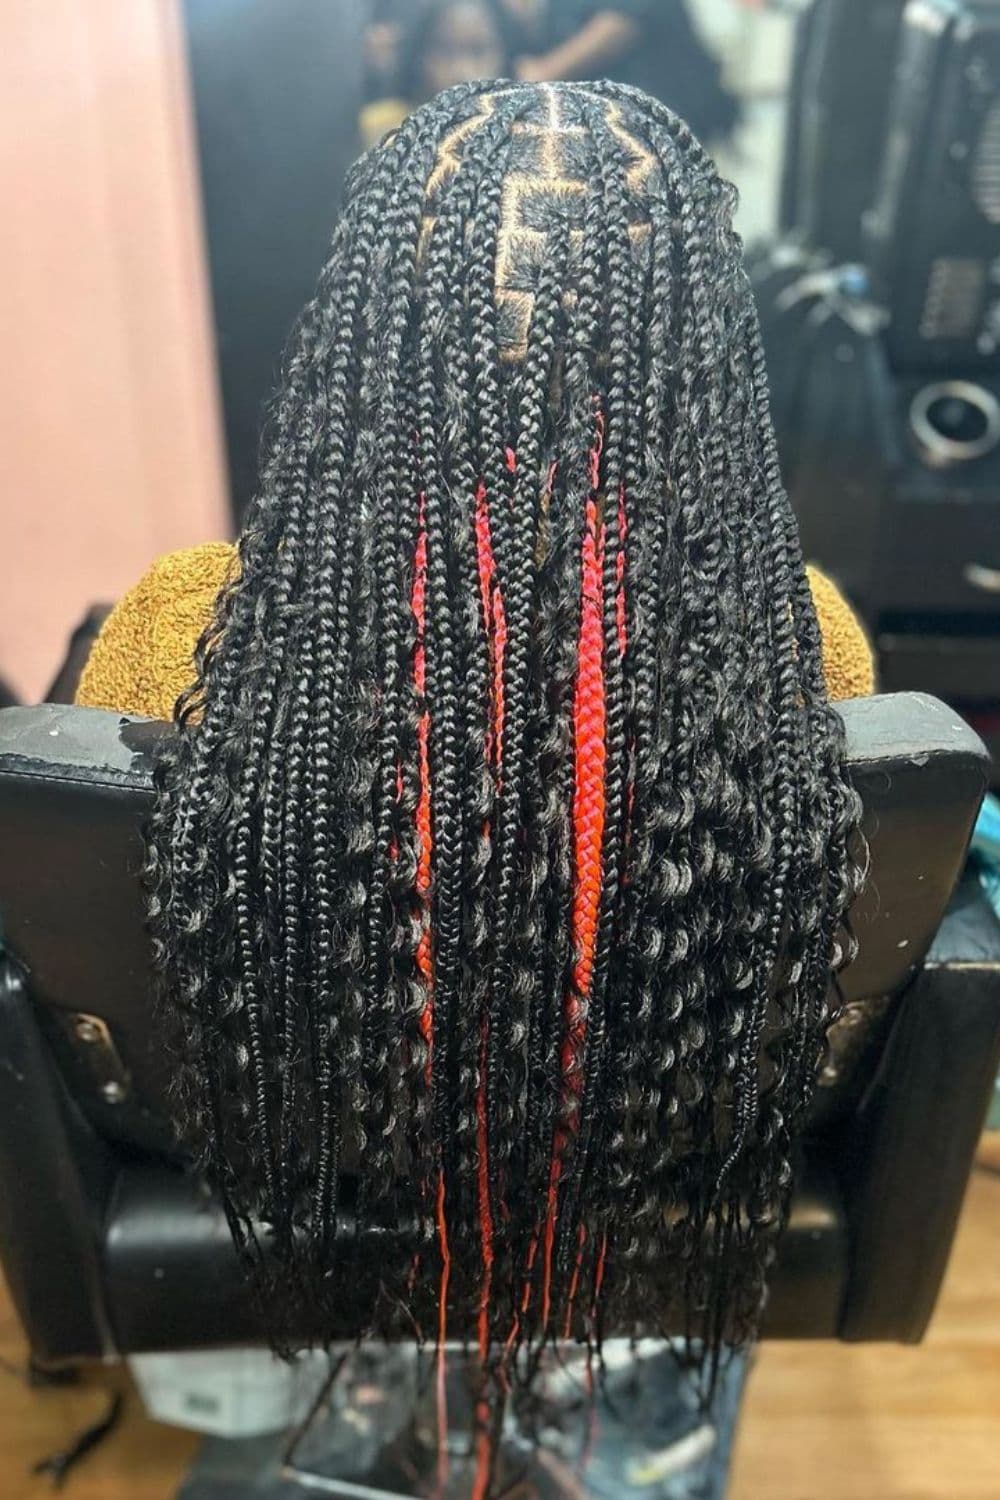 A woman with black and red peekaboo goddess braids.